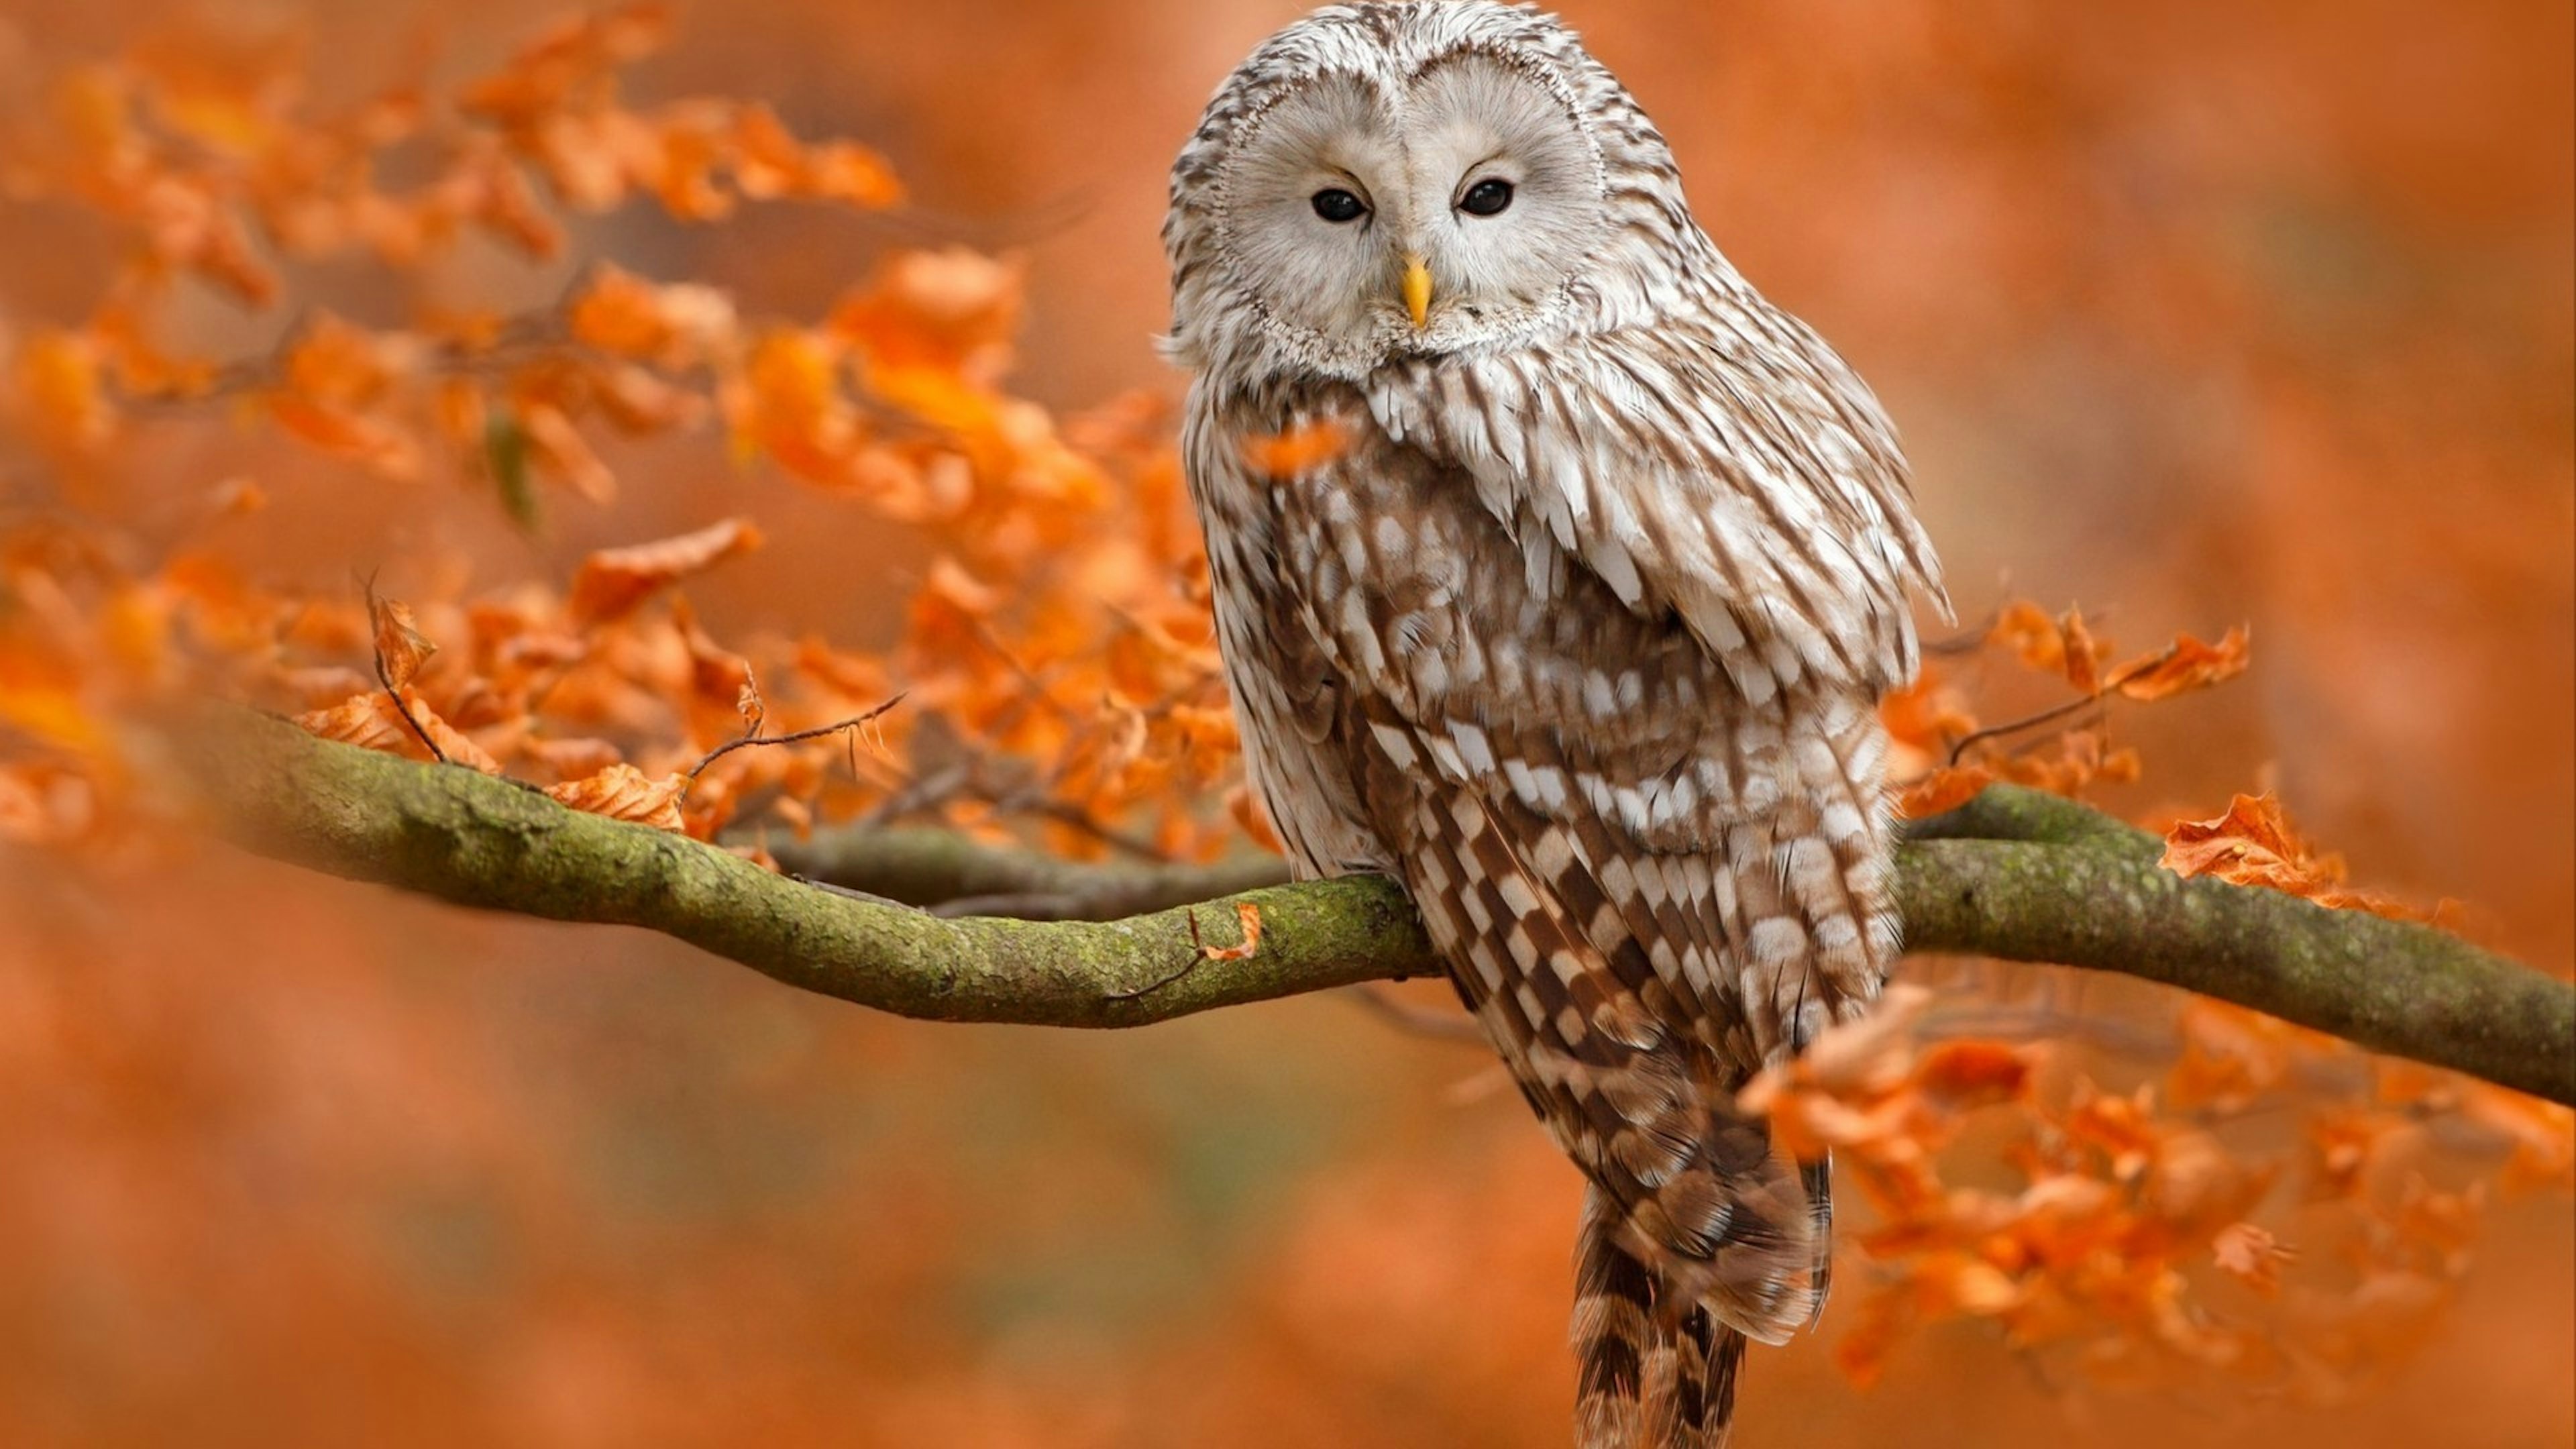 Autumn in nature with owl. Ural Owl, Strix uralensis, sitting on tree branch with orange leaves in oak forest, Norway